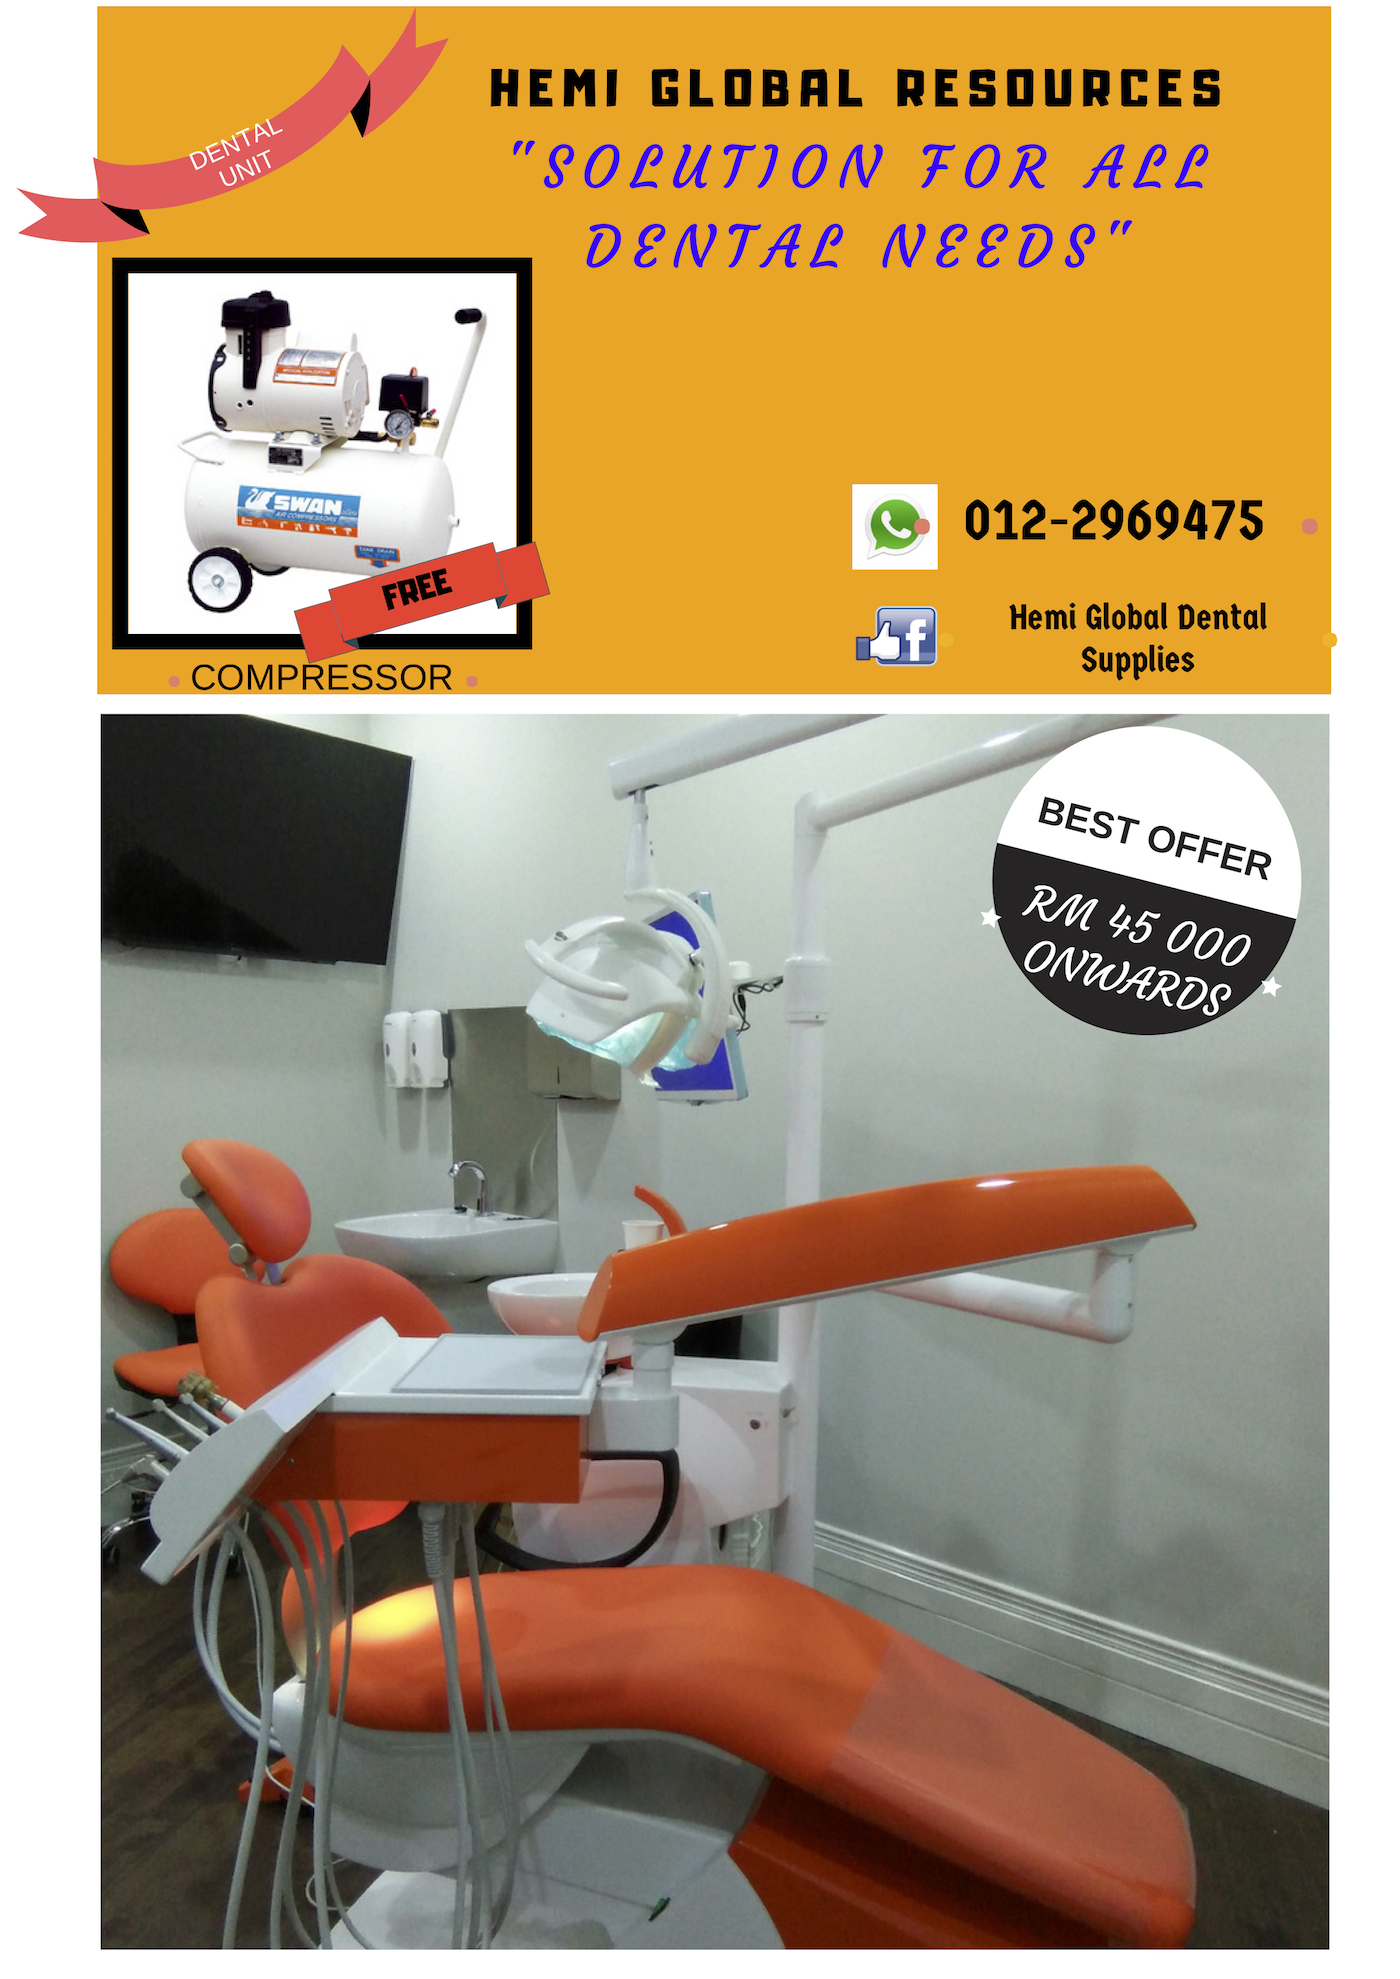 RM 28,000 Full Set Dental Chair - Special Discount for Dentists on